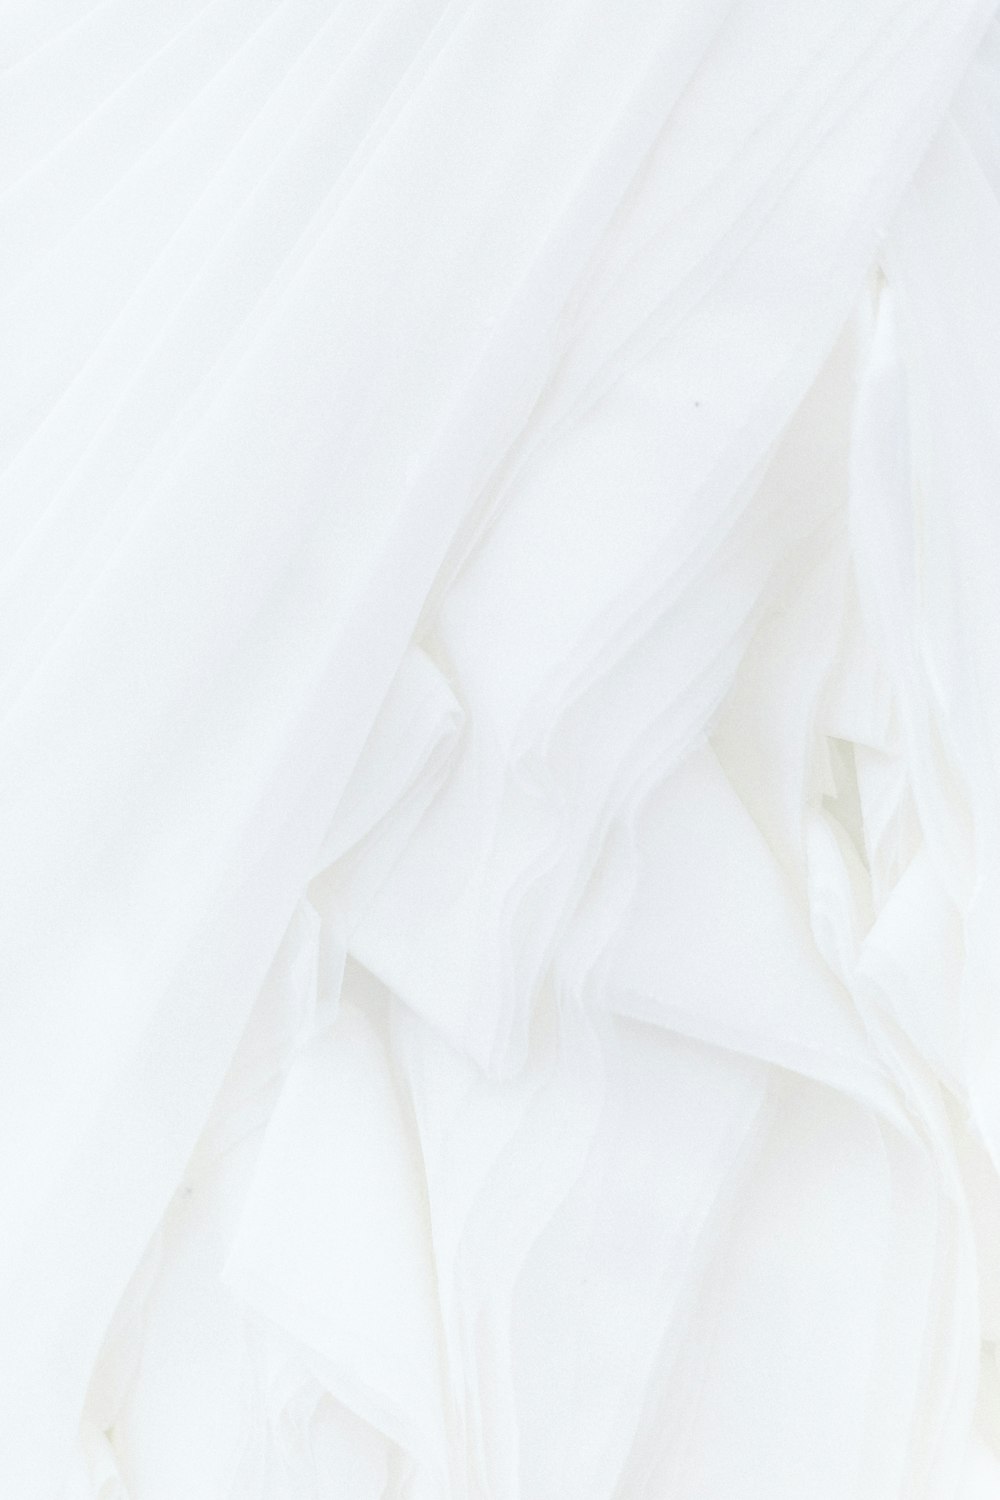 1500+ White Aesthetic Pictures | Download Free Images on Unsplash